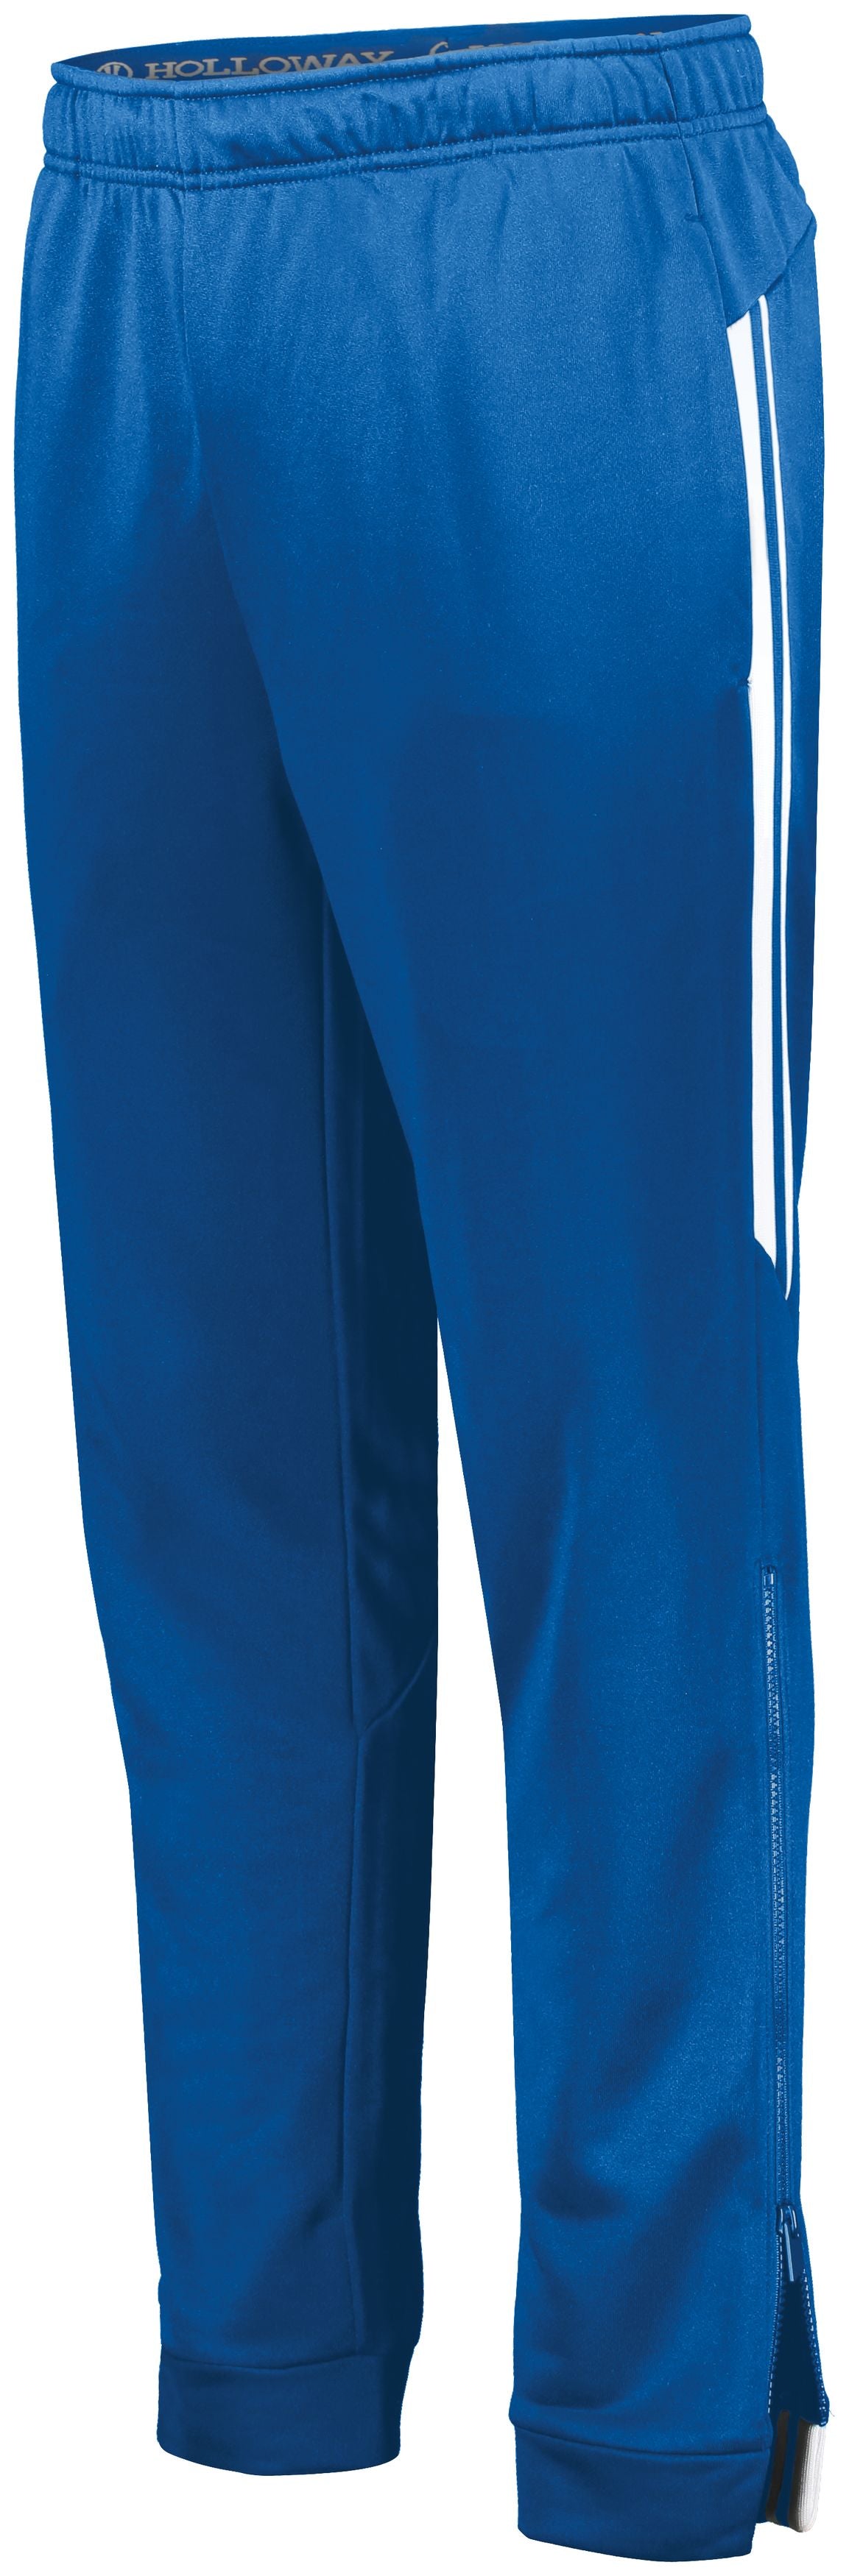 Holloway Retro Grade Pant in Royal/White  -Part of the Adult, Adult-Pants, Pants, Holloway product lines at KanaleyCreations.com